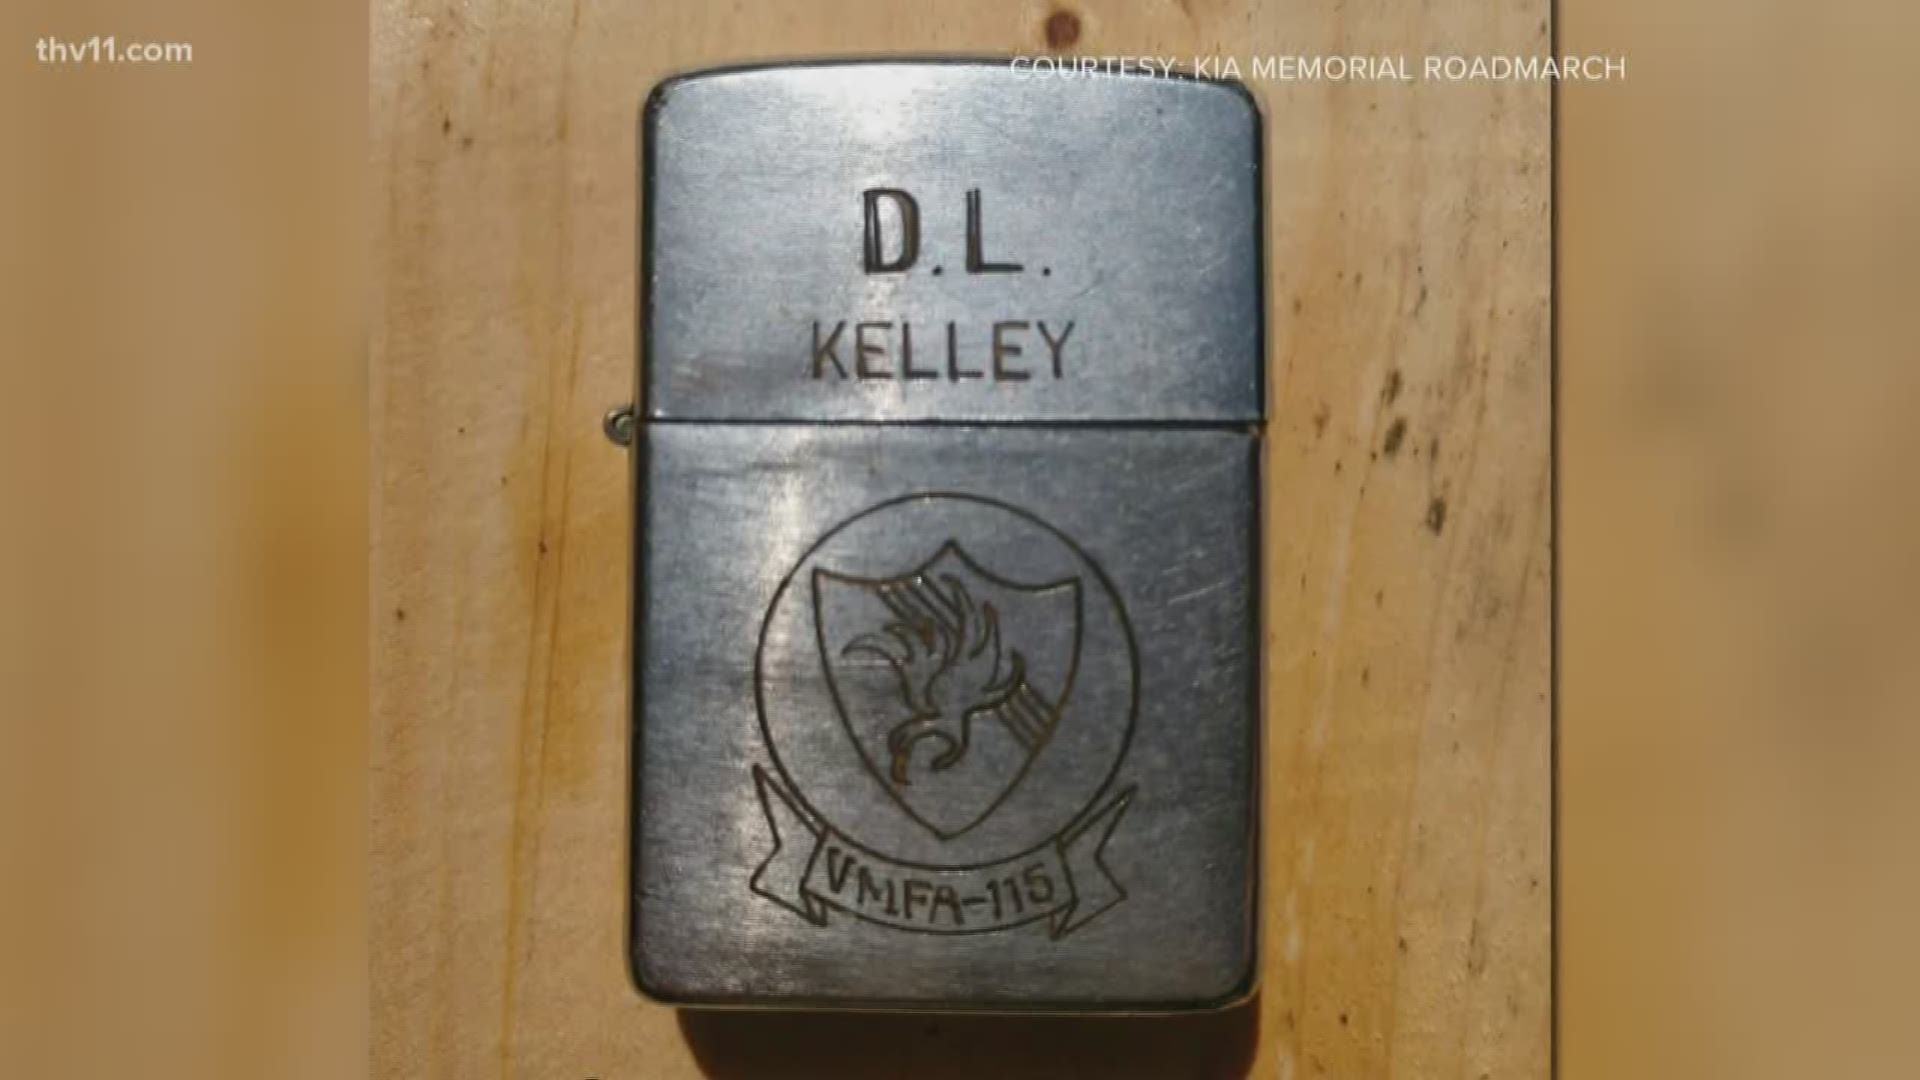 A Clinton man will go to New York next week to retrieve a long-lost memento of his dad's.